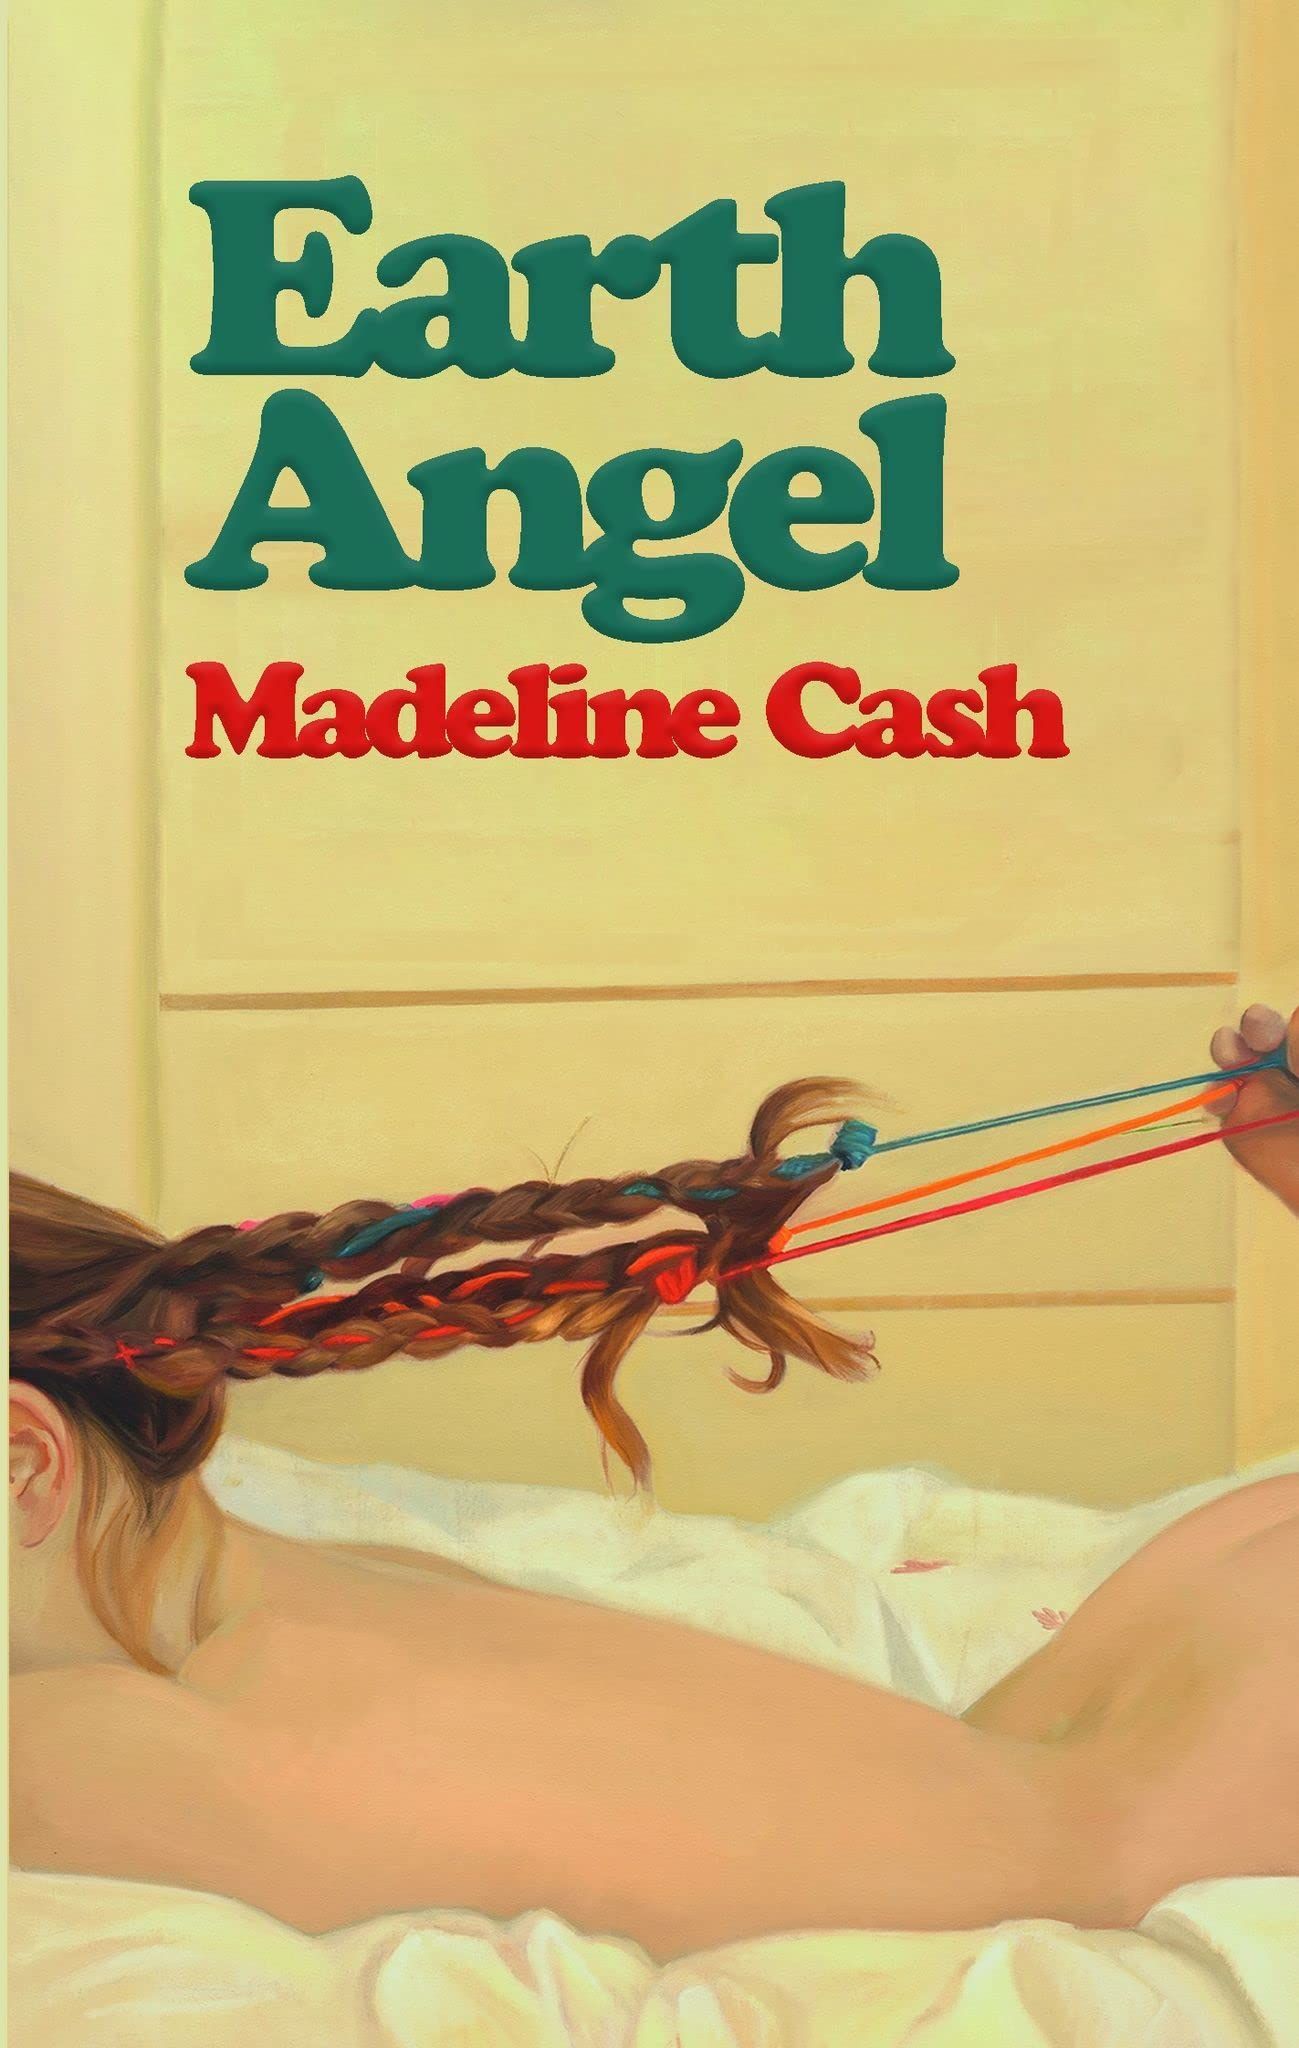 It Girls and E-girls: On Madeline Cash’s “Earth Angel”